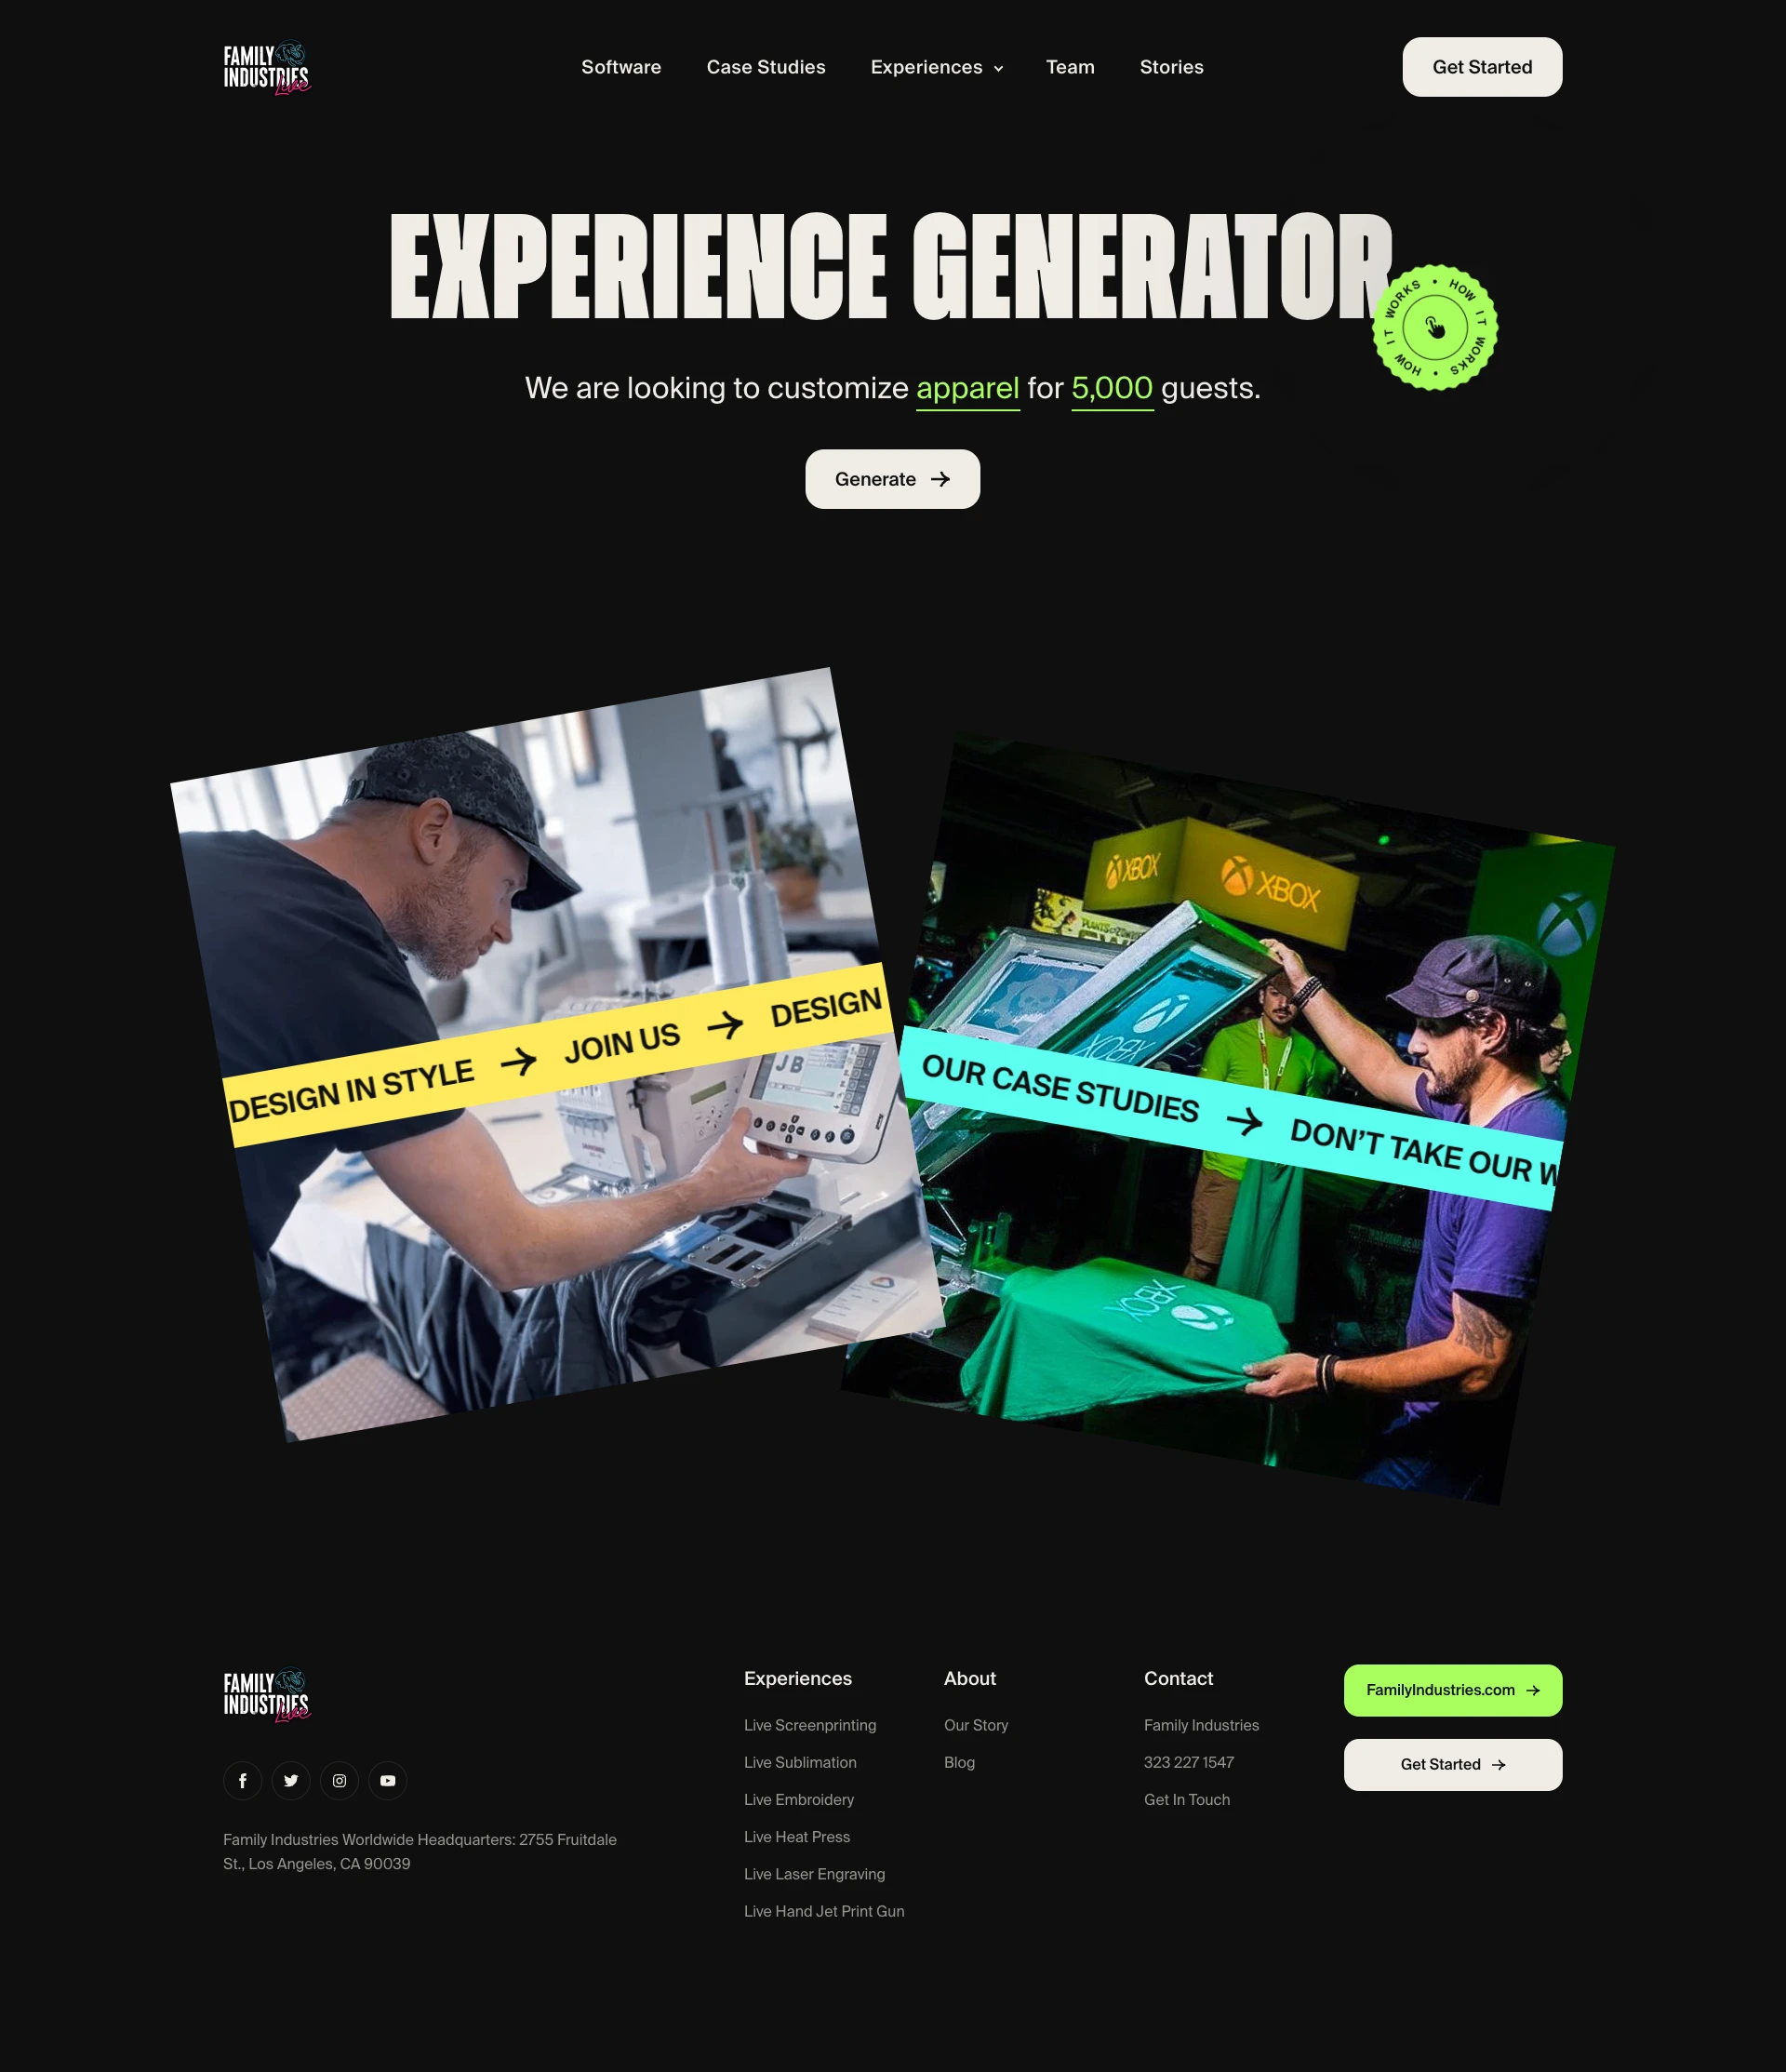 Family Industries Live Landing Page Example: On-site customization and gifting featuring live screen printing, live sublimation, live embroidery, live heat press, live laser engraving, hand jet printing, and virtual events customizations.